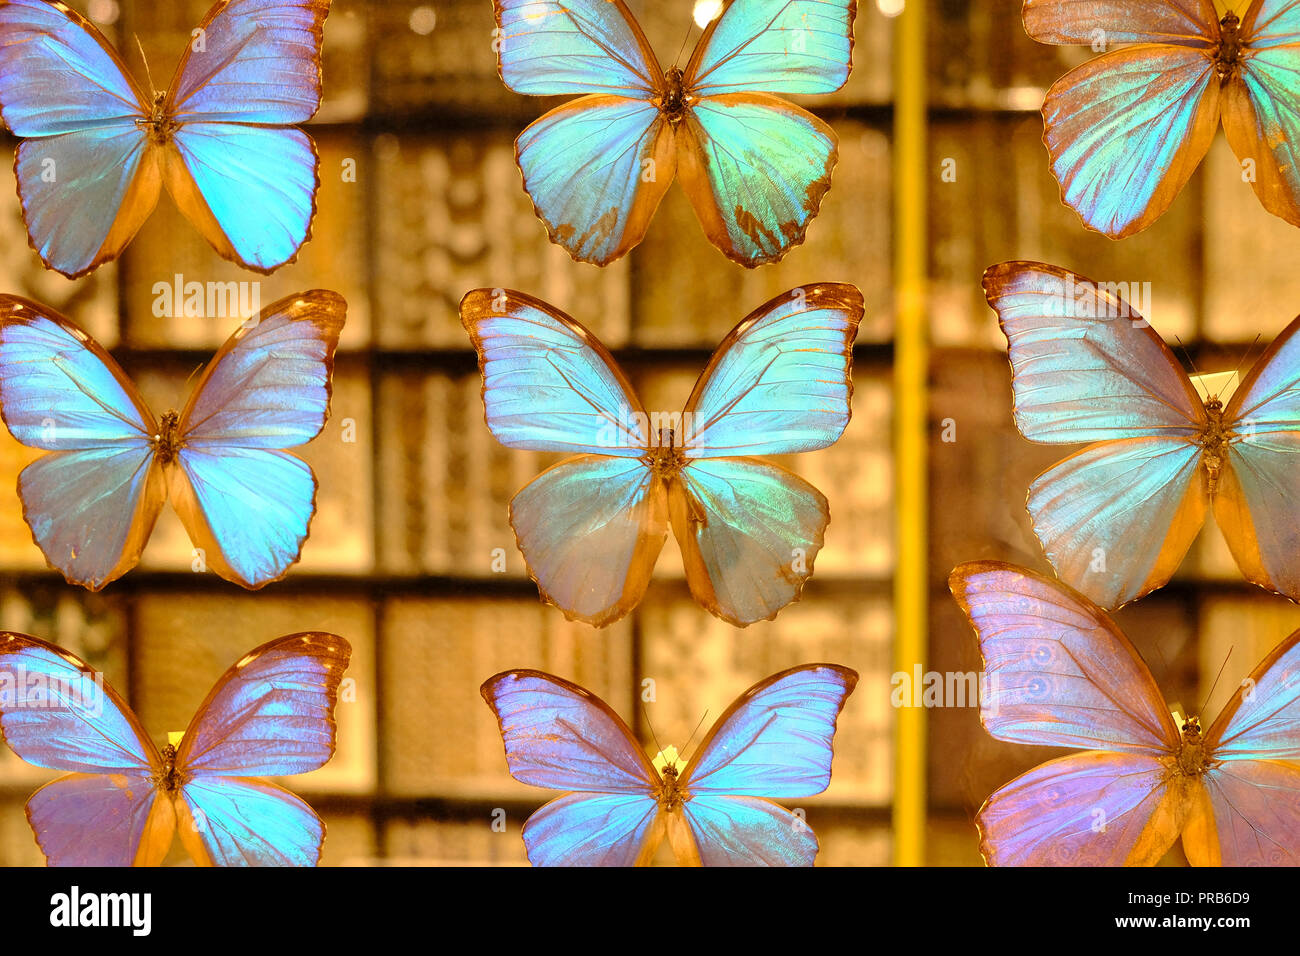 Iridescent Morpho butterflies displayed in a transparent glass frame Stock Photo